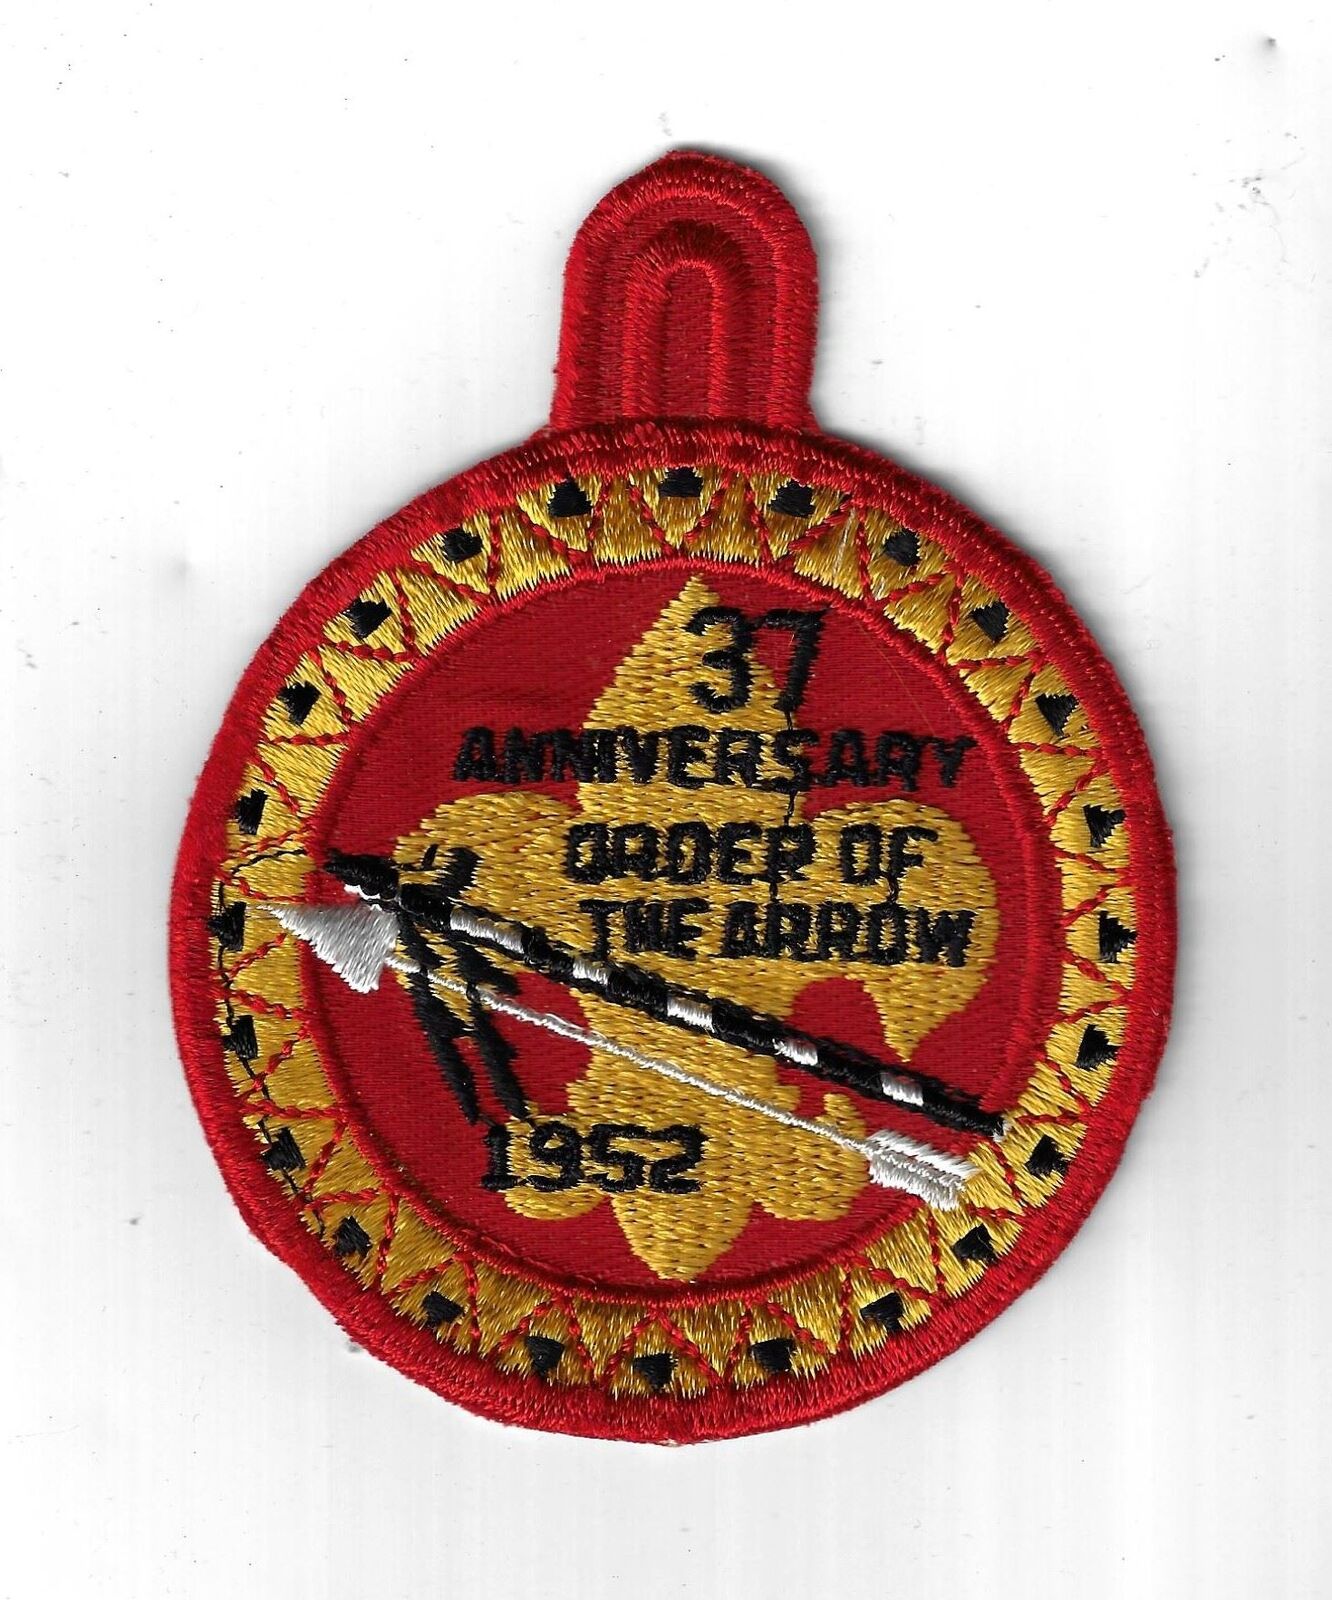 Authentic 1952 NOAC Patch Order of The Arrow RED Bdr. [J1137]